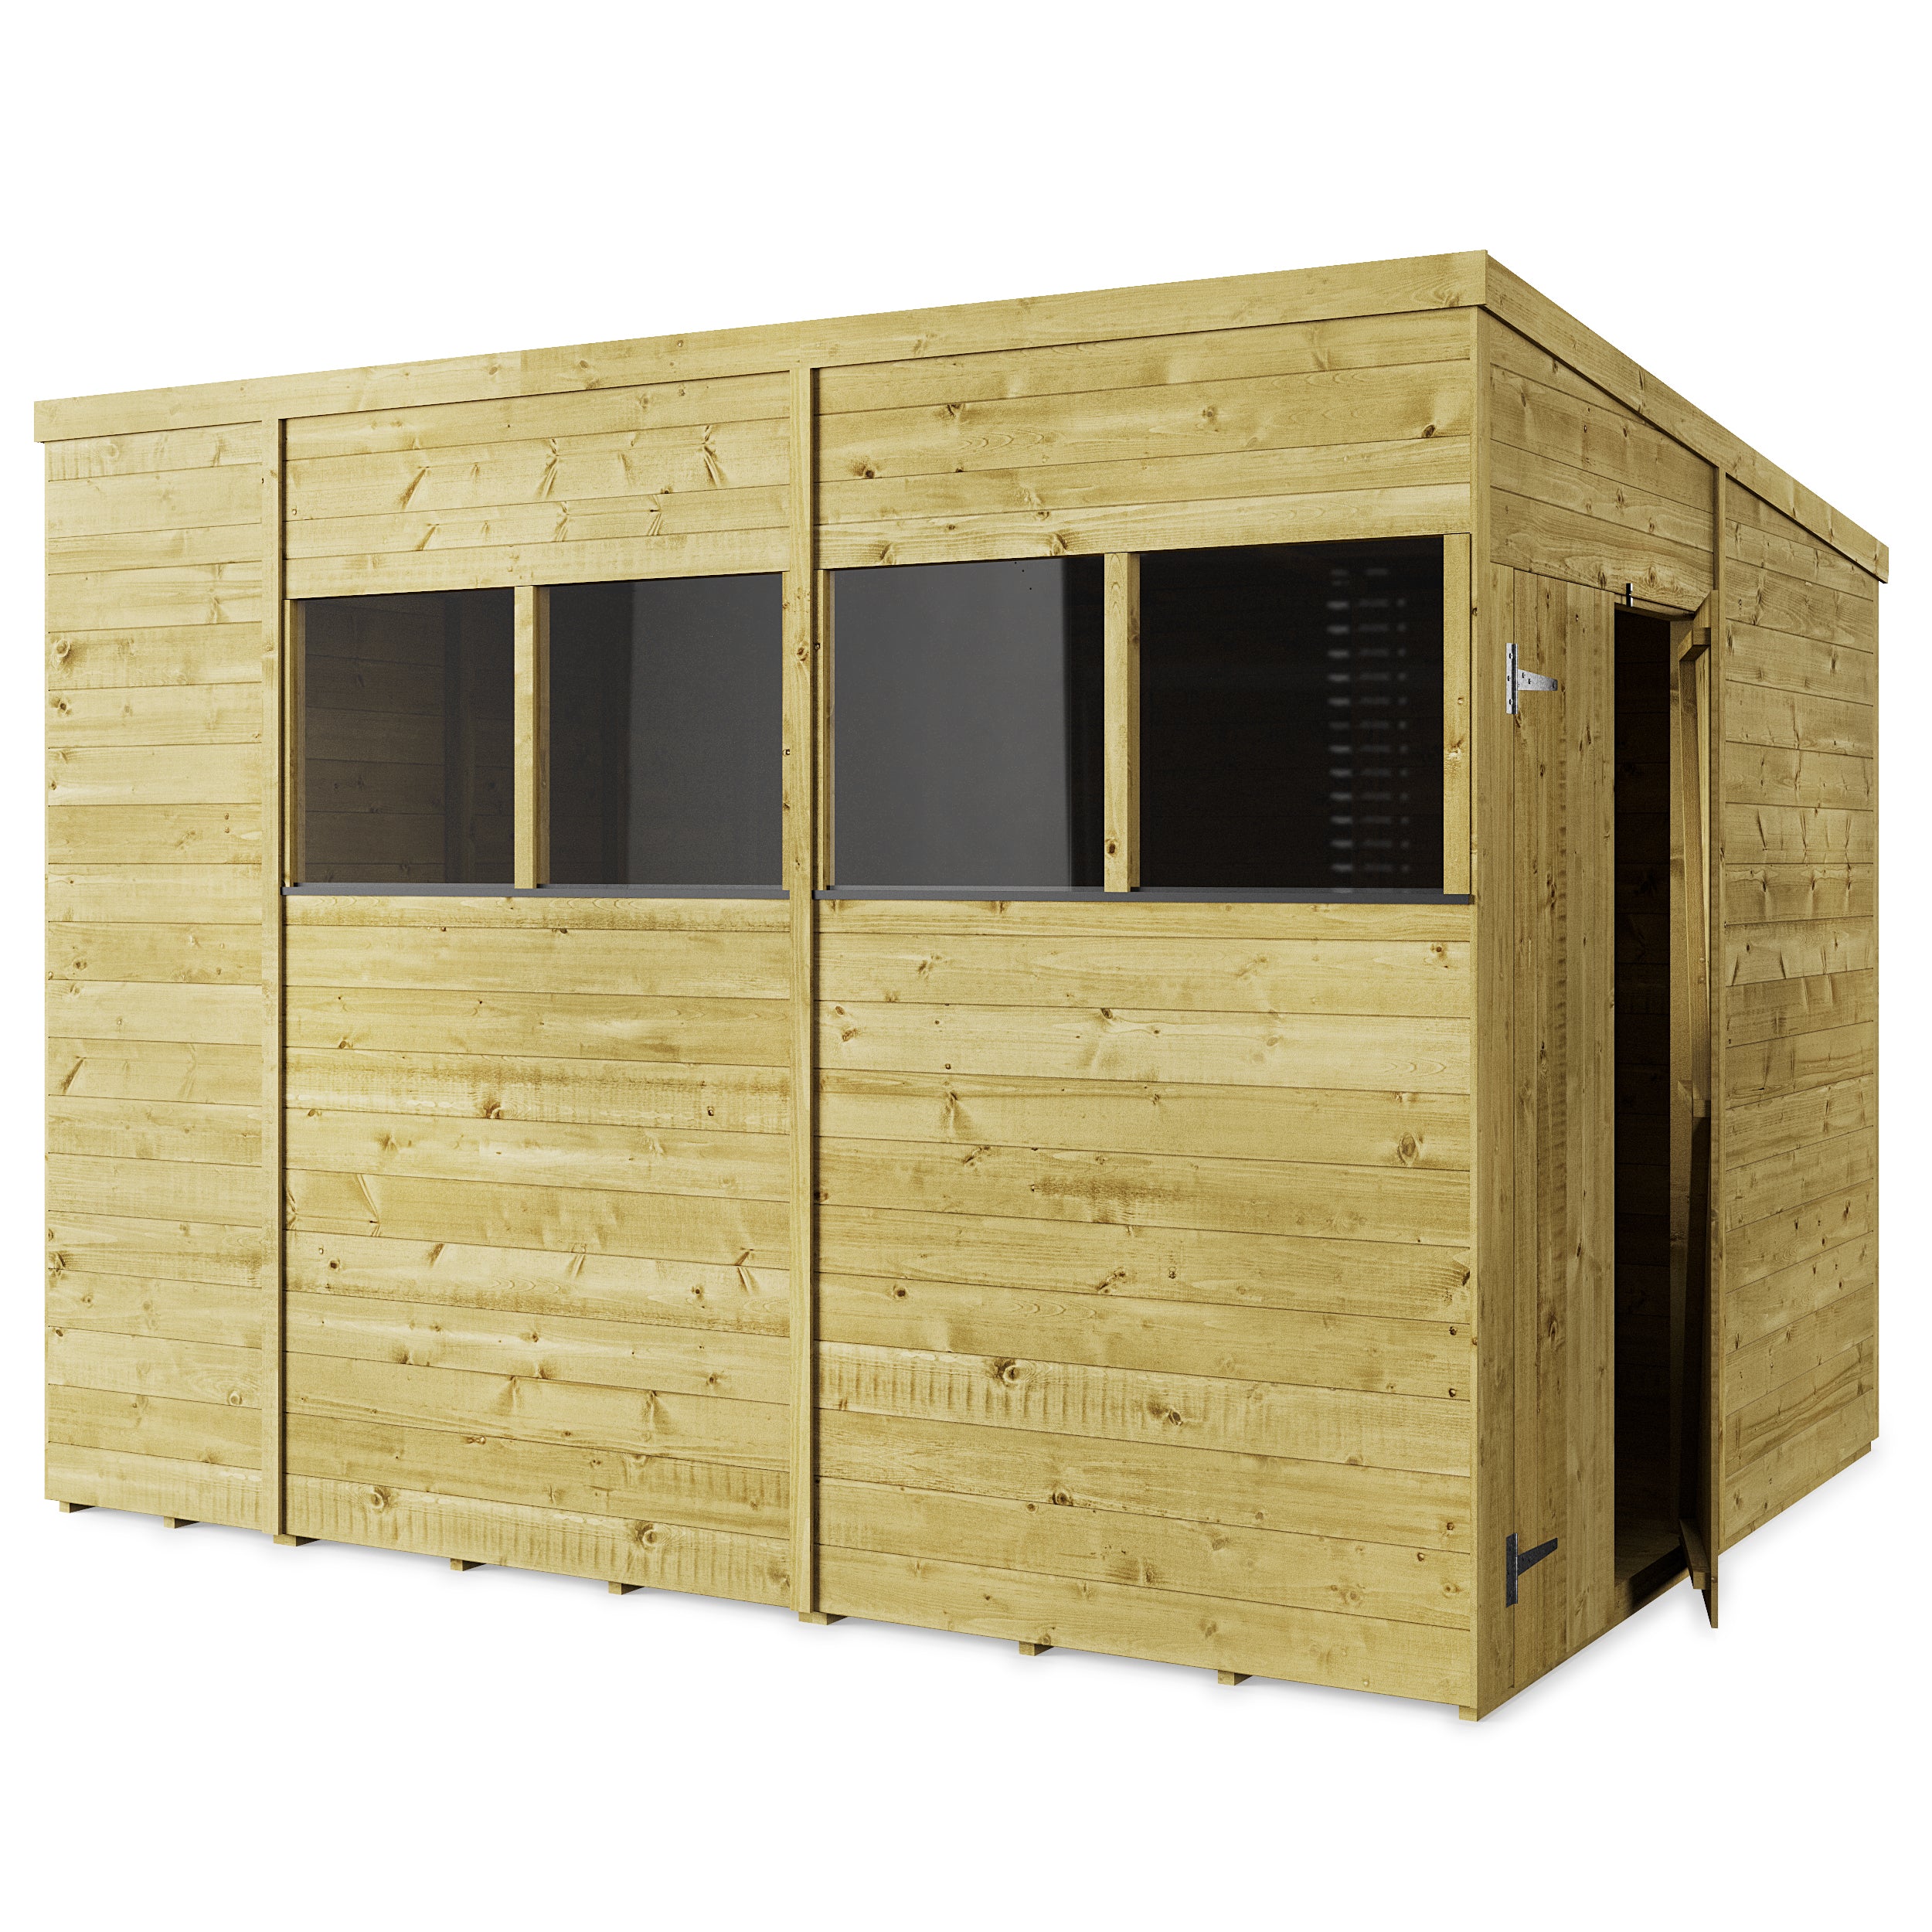 Store More Tongue and Groove Pent Shed - 10x8 Windowed